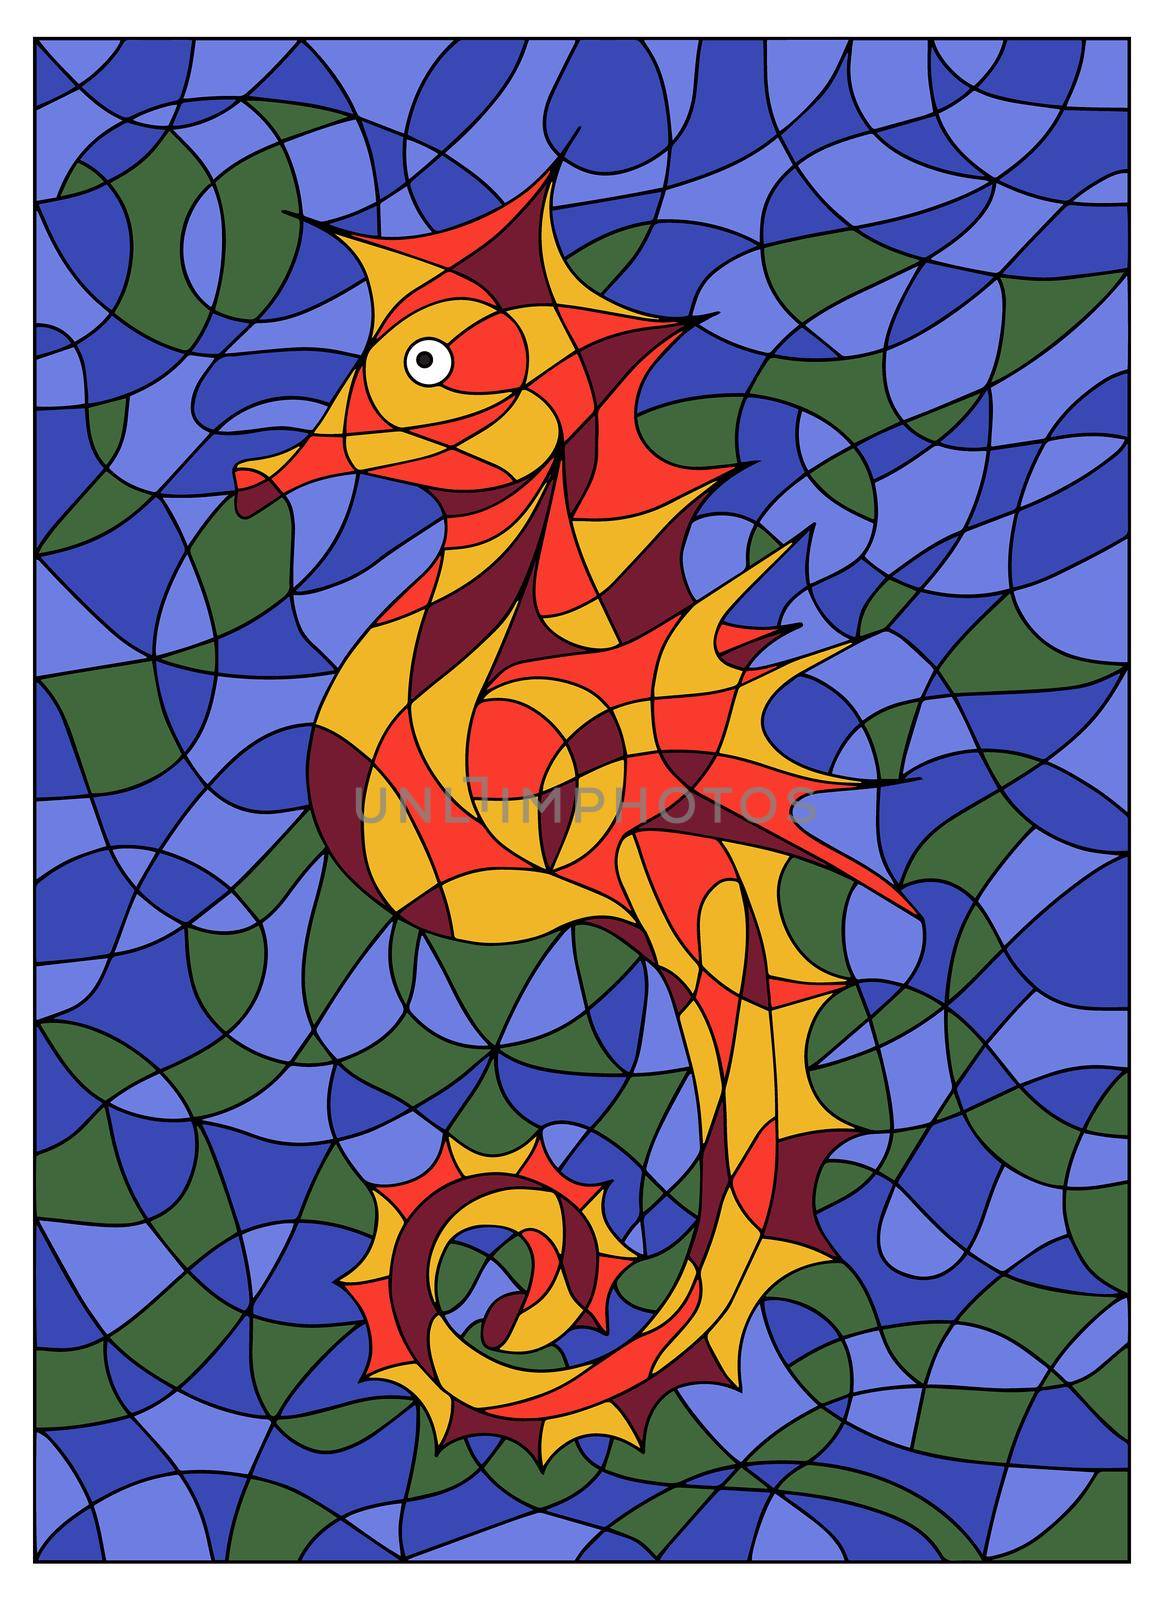 Colored Illustration in stained glass style with abstract Seahorse. Abstract Seahorse Illustration.